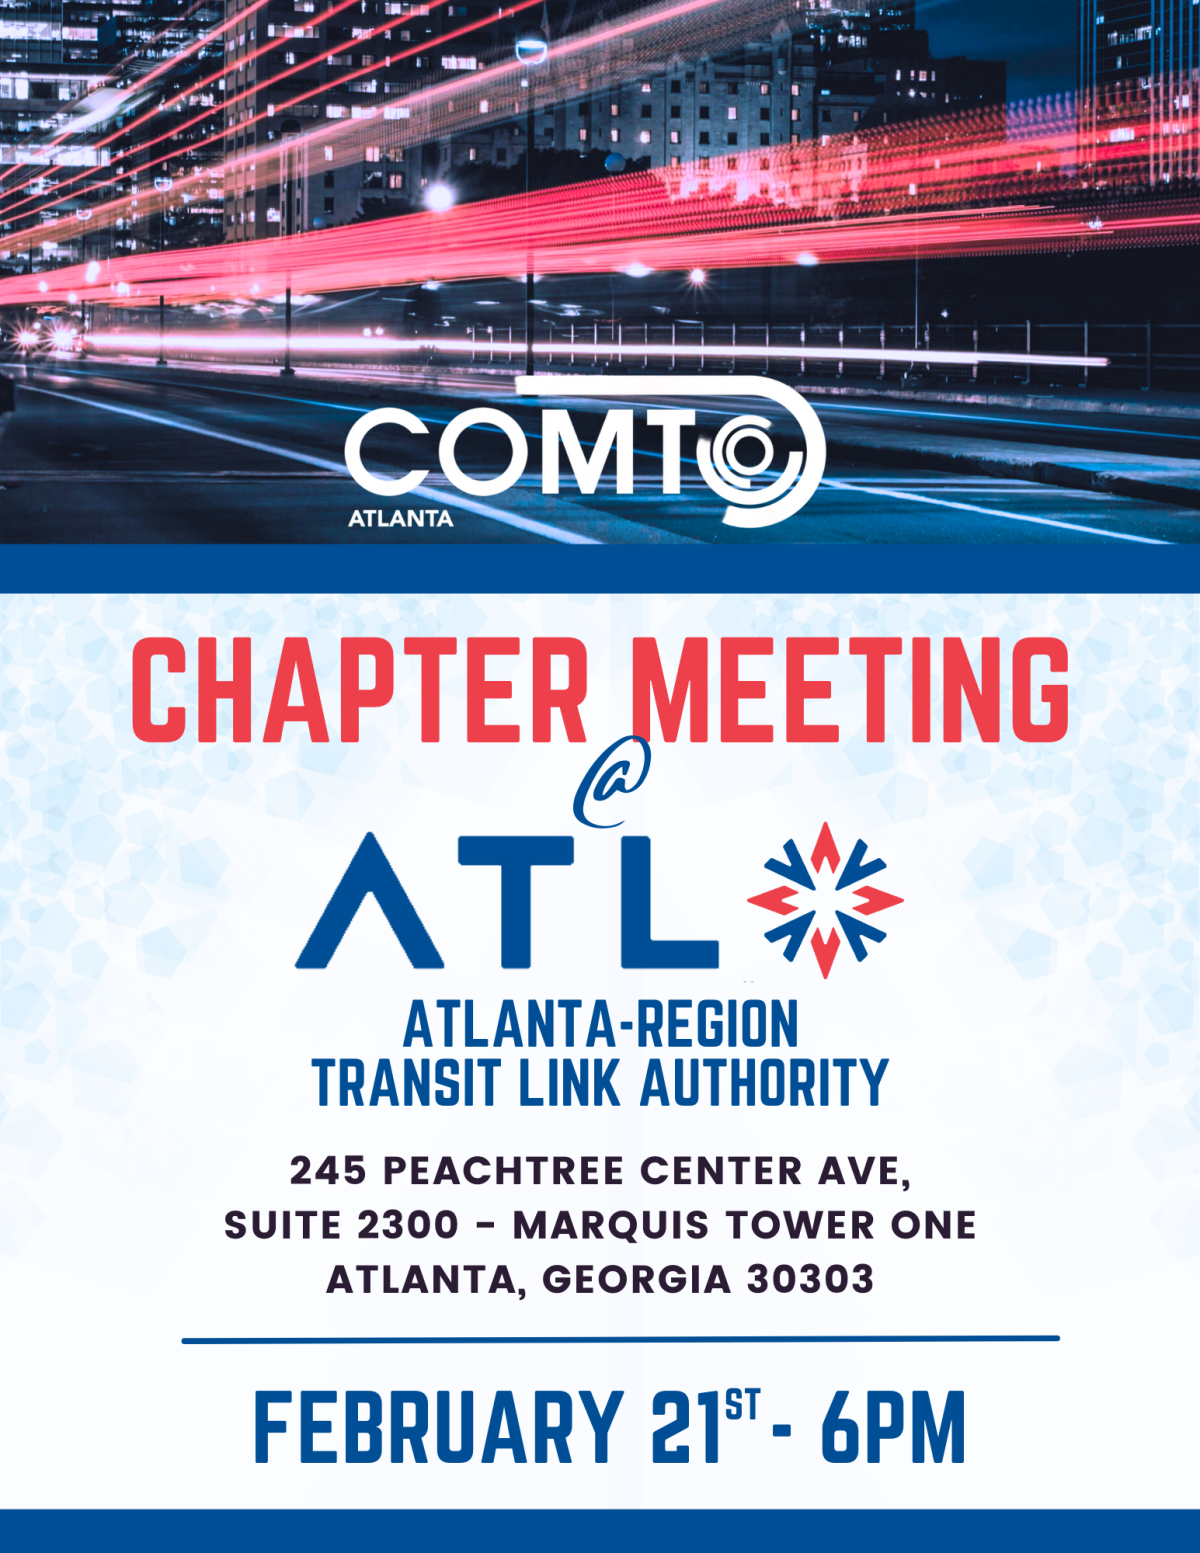 COMTO Atlanta Chapter Meeting February 21 6PM 